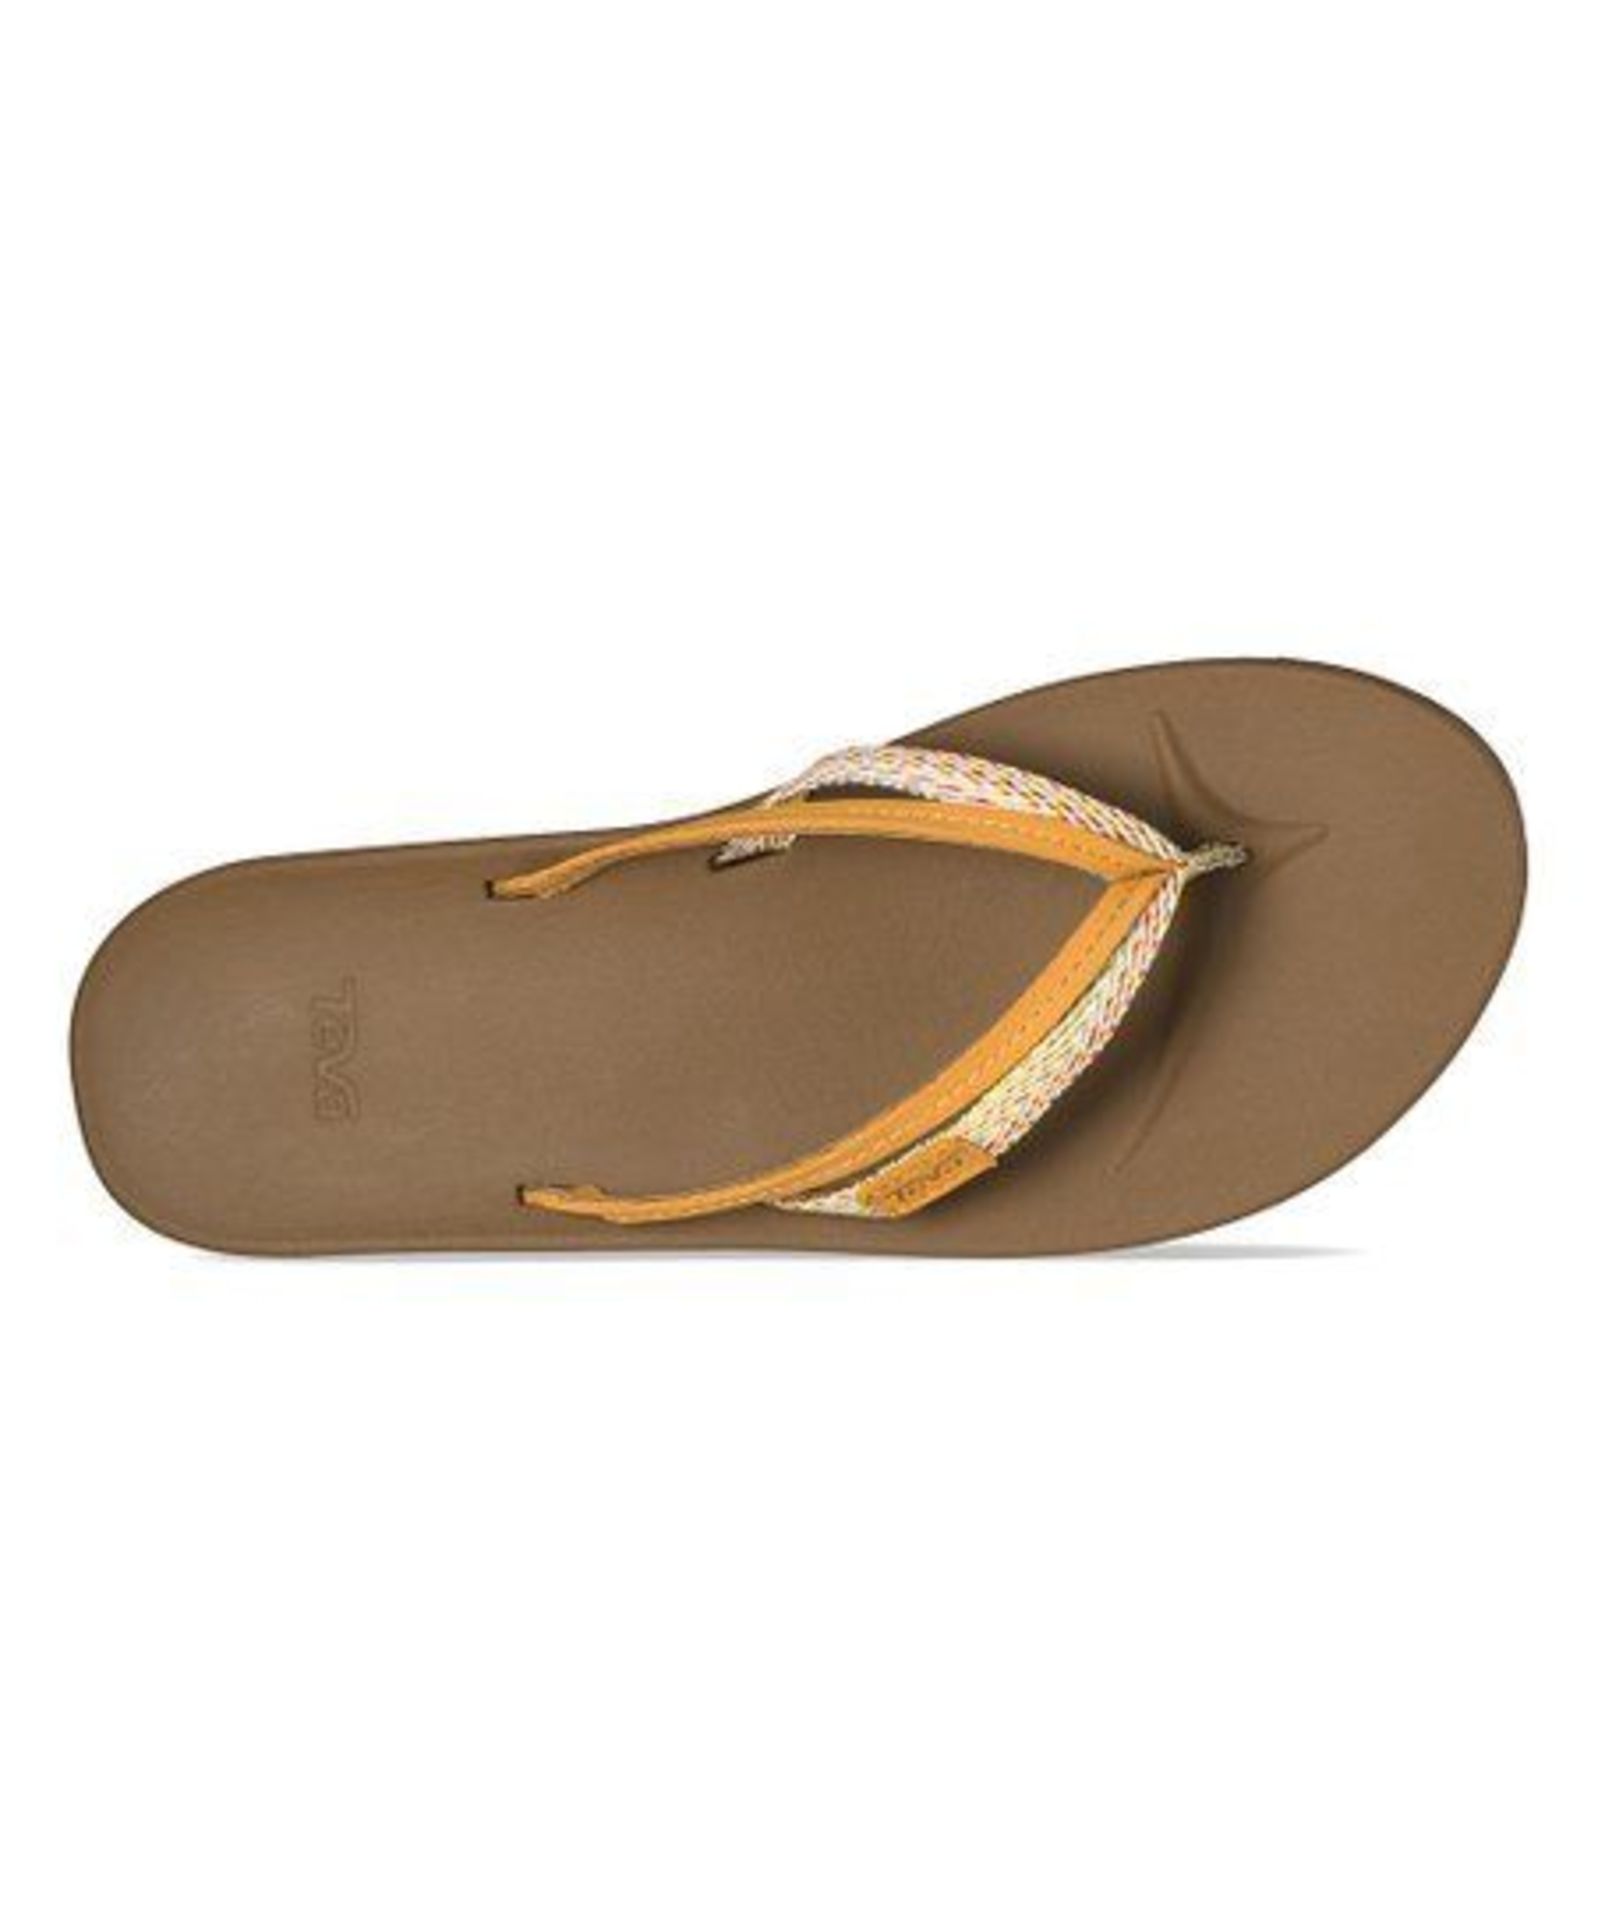 Teva Tan Azure 2-Strap Flip-Flop Uk Size:4 (New With Box) [Ref: 54275435-B-002-Tf] - Image 5 of 5